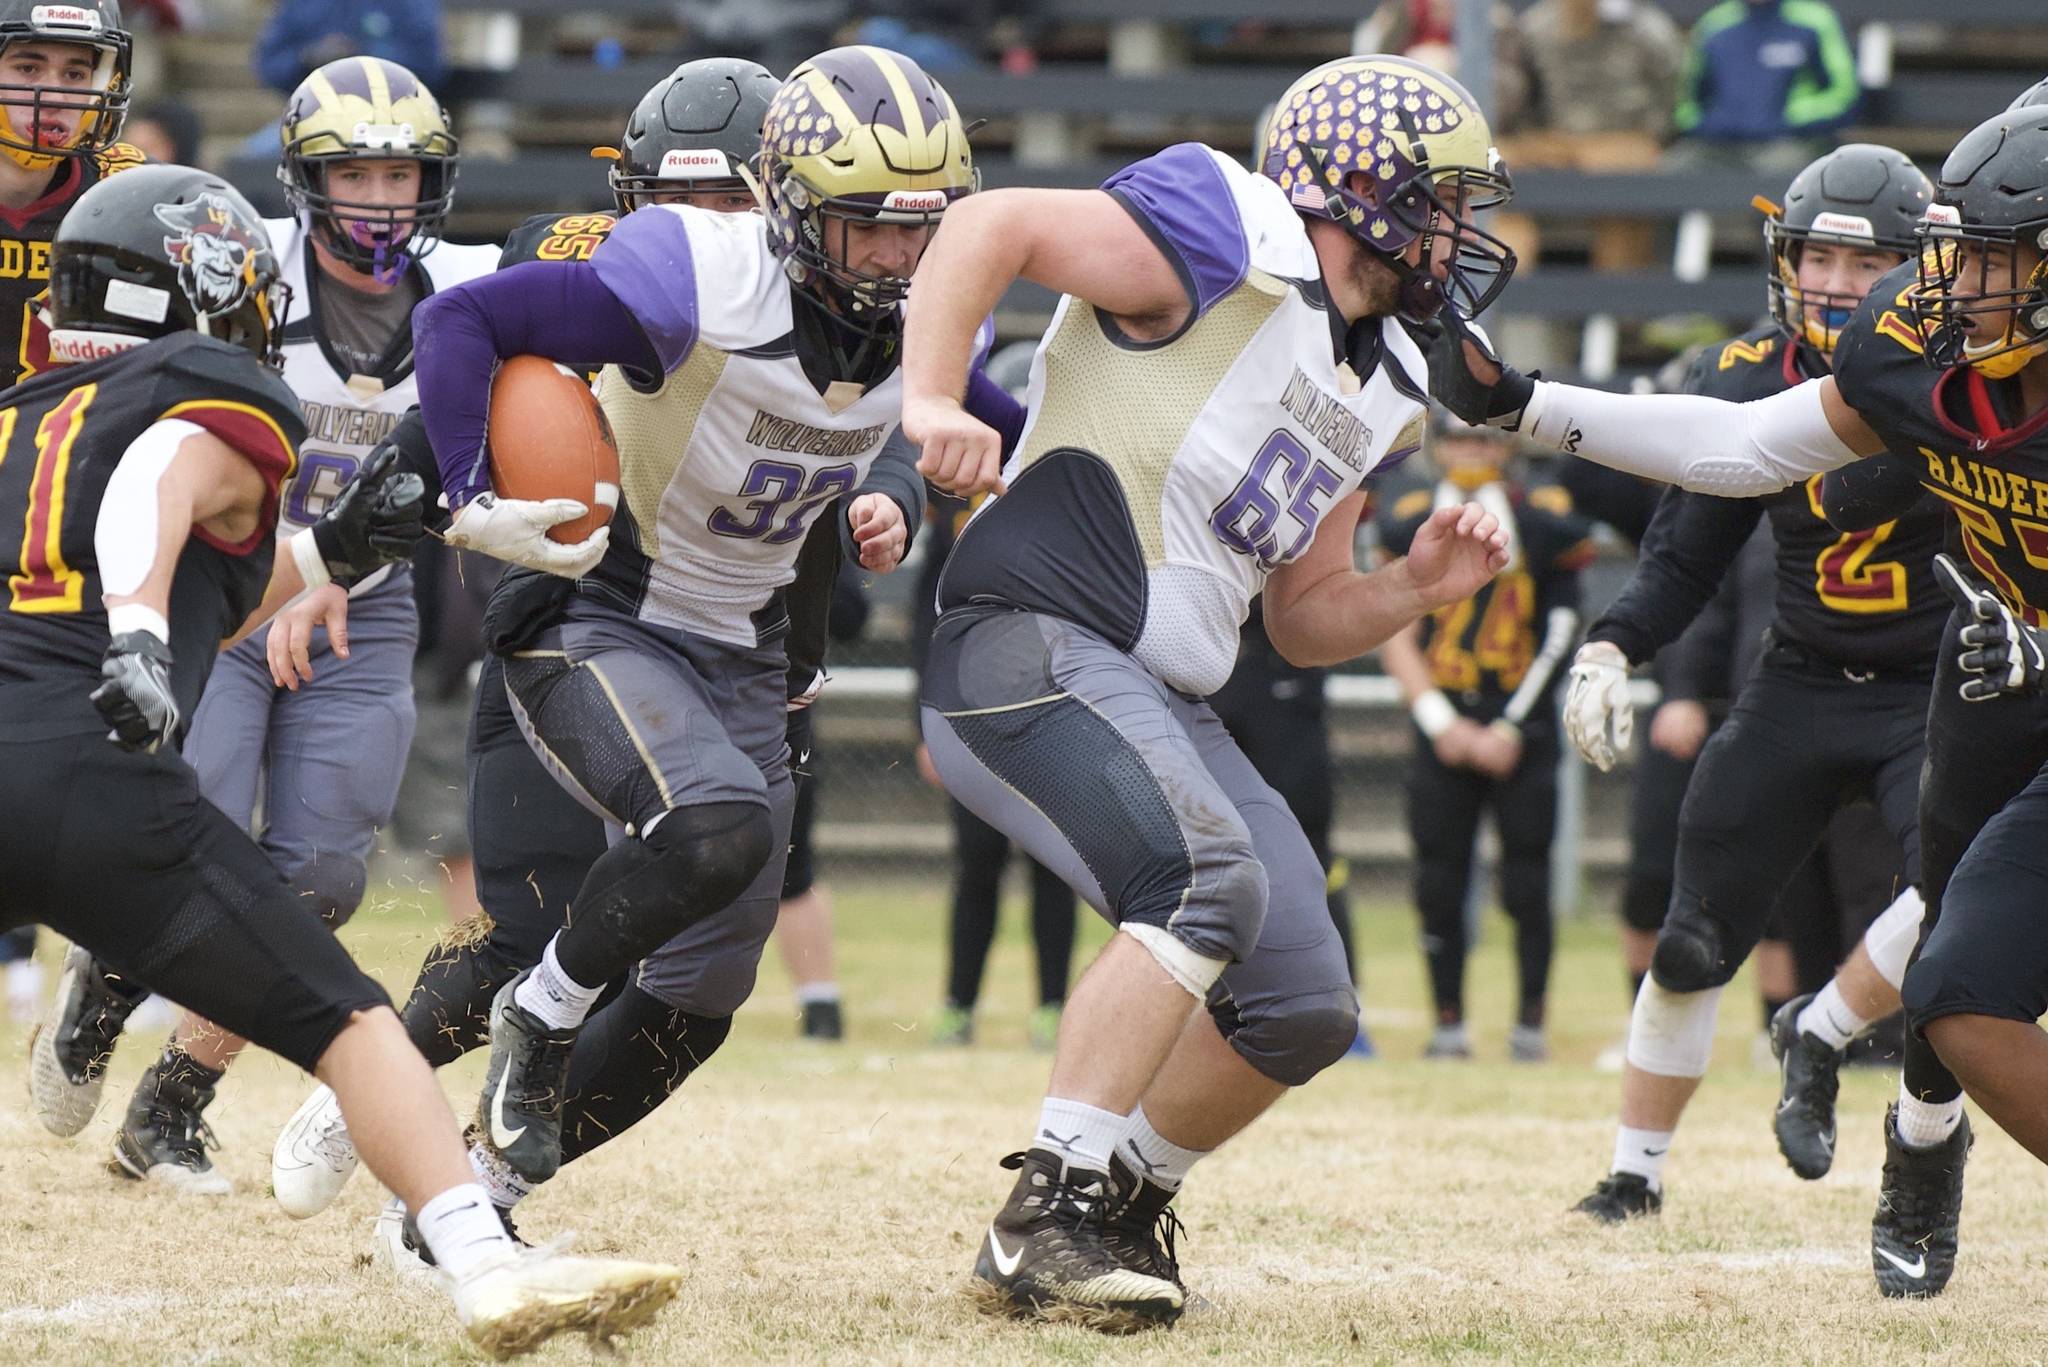 #65 Ty Vague clears the path for #32 Kaden Ritchie. (John Stimpson/Contributed photo.)